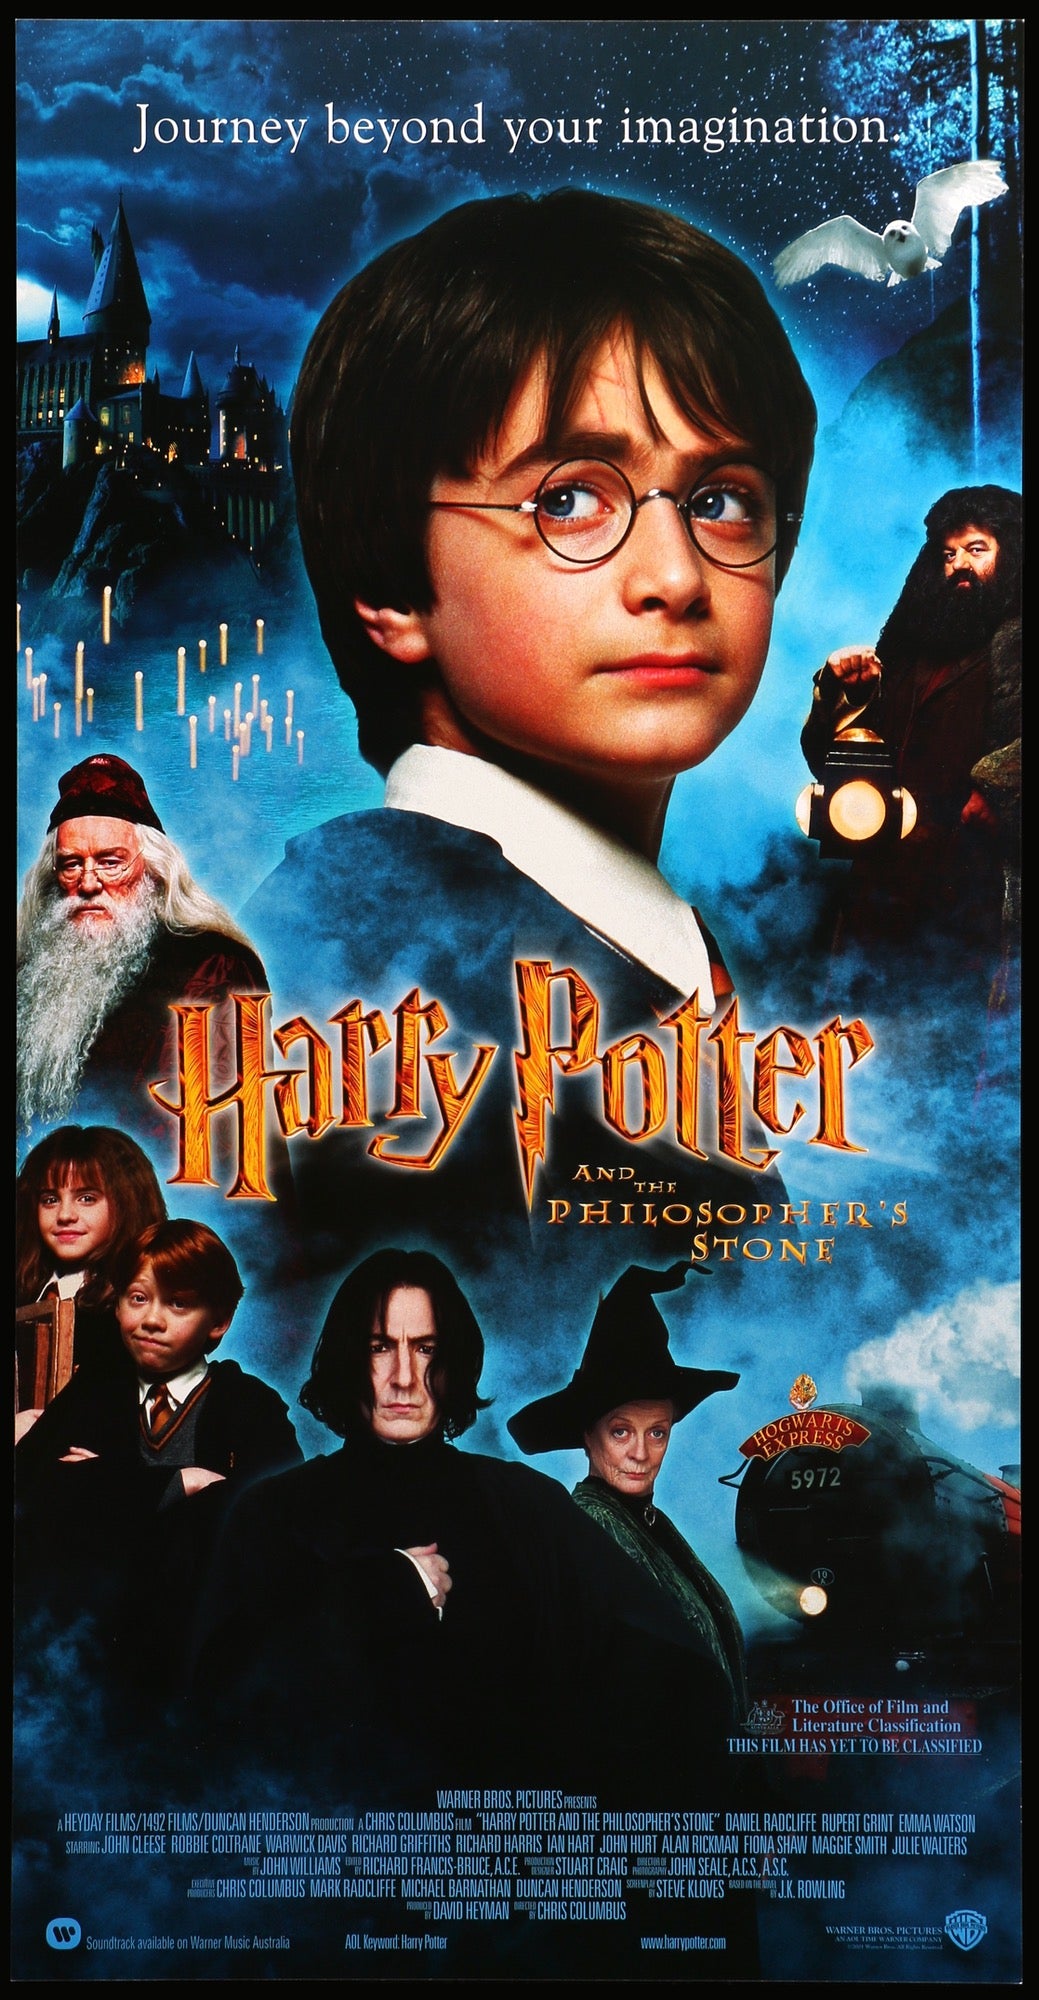 HARRY POTTER AND THE PHILOSOPHER'S STONE, Original Daniel Radcliffe